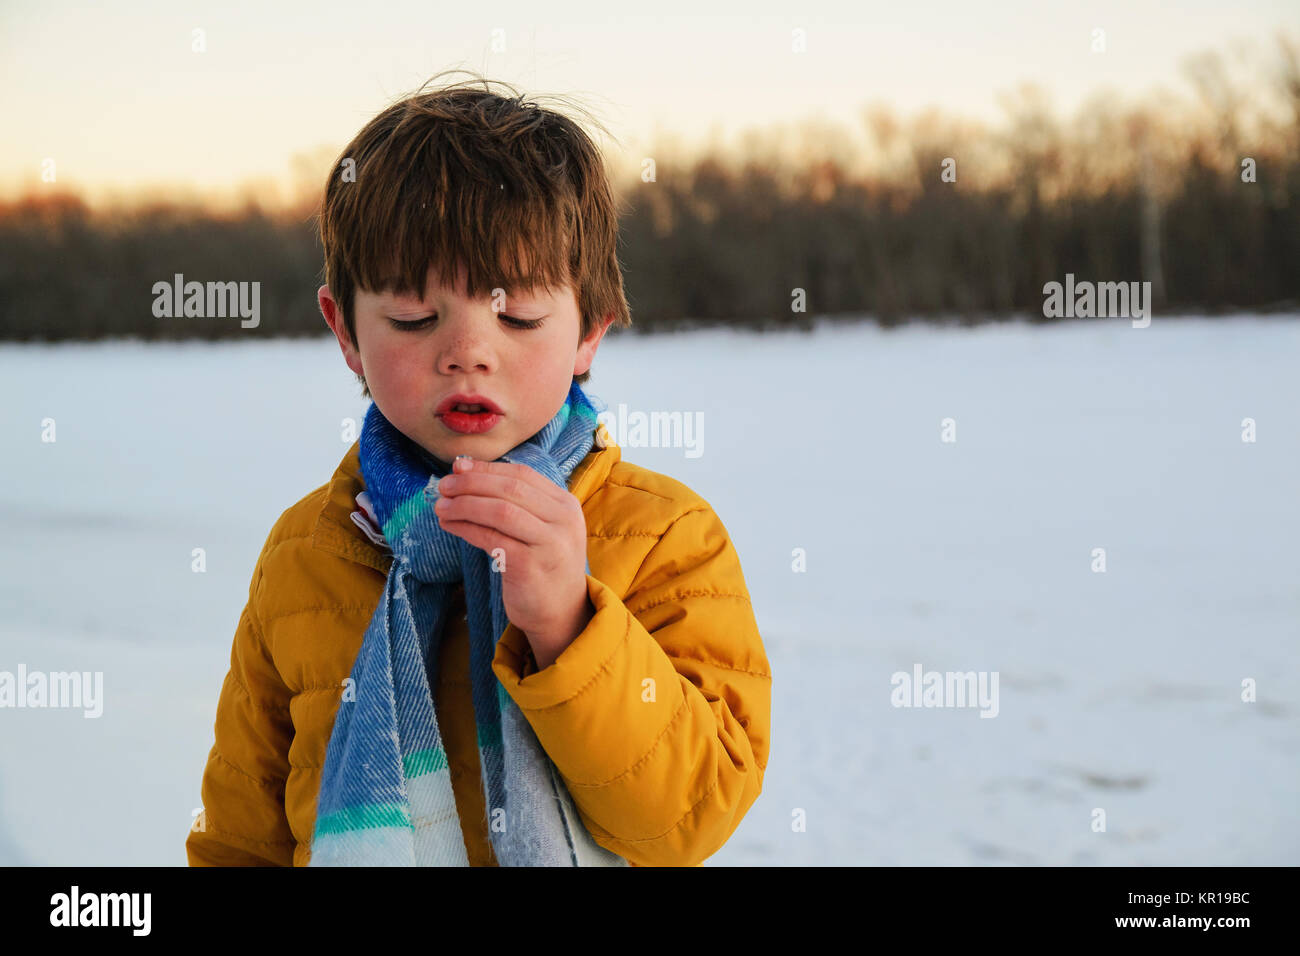 Boy standing on a frozen lake looking at piece of ice Stock Photo